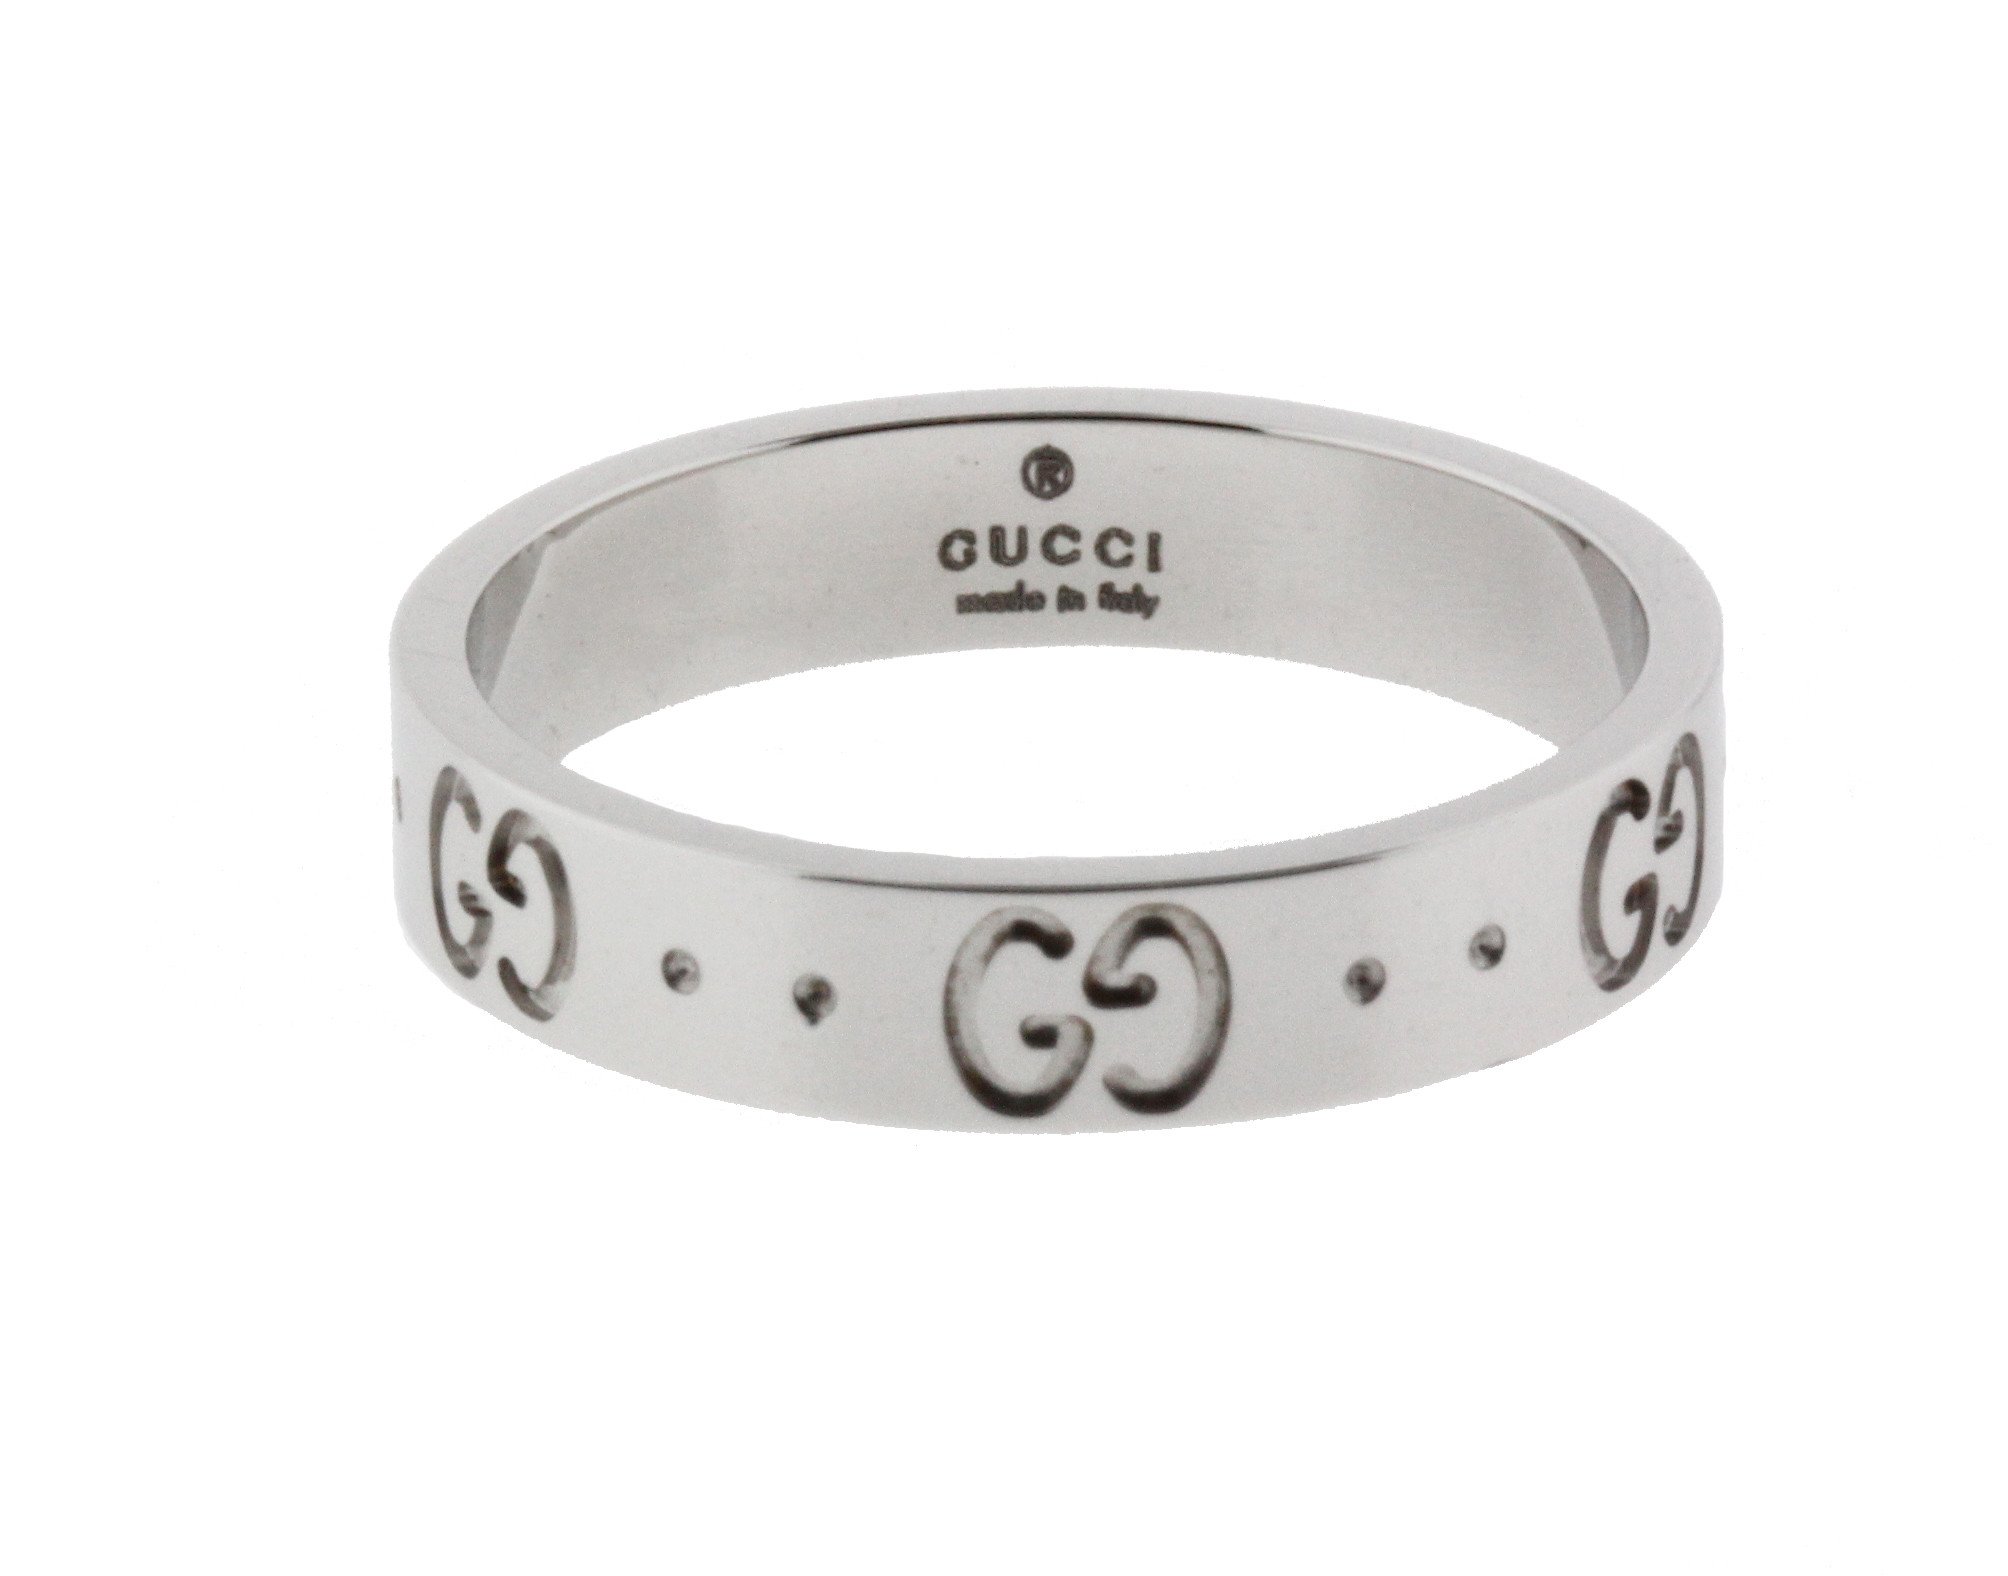 Gucci Icon thin band band ring in 18 karat white gold new in box size 5.25